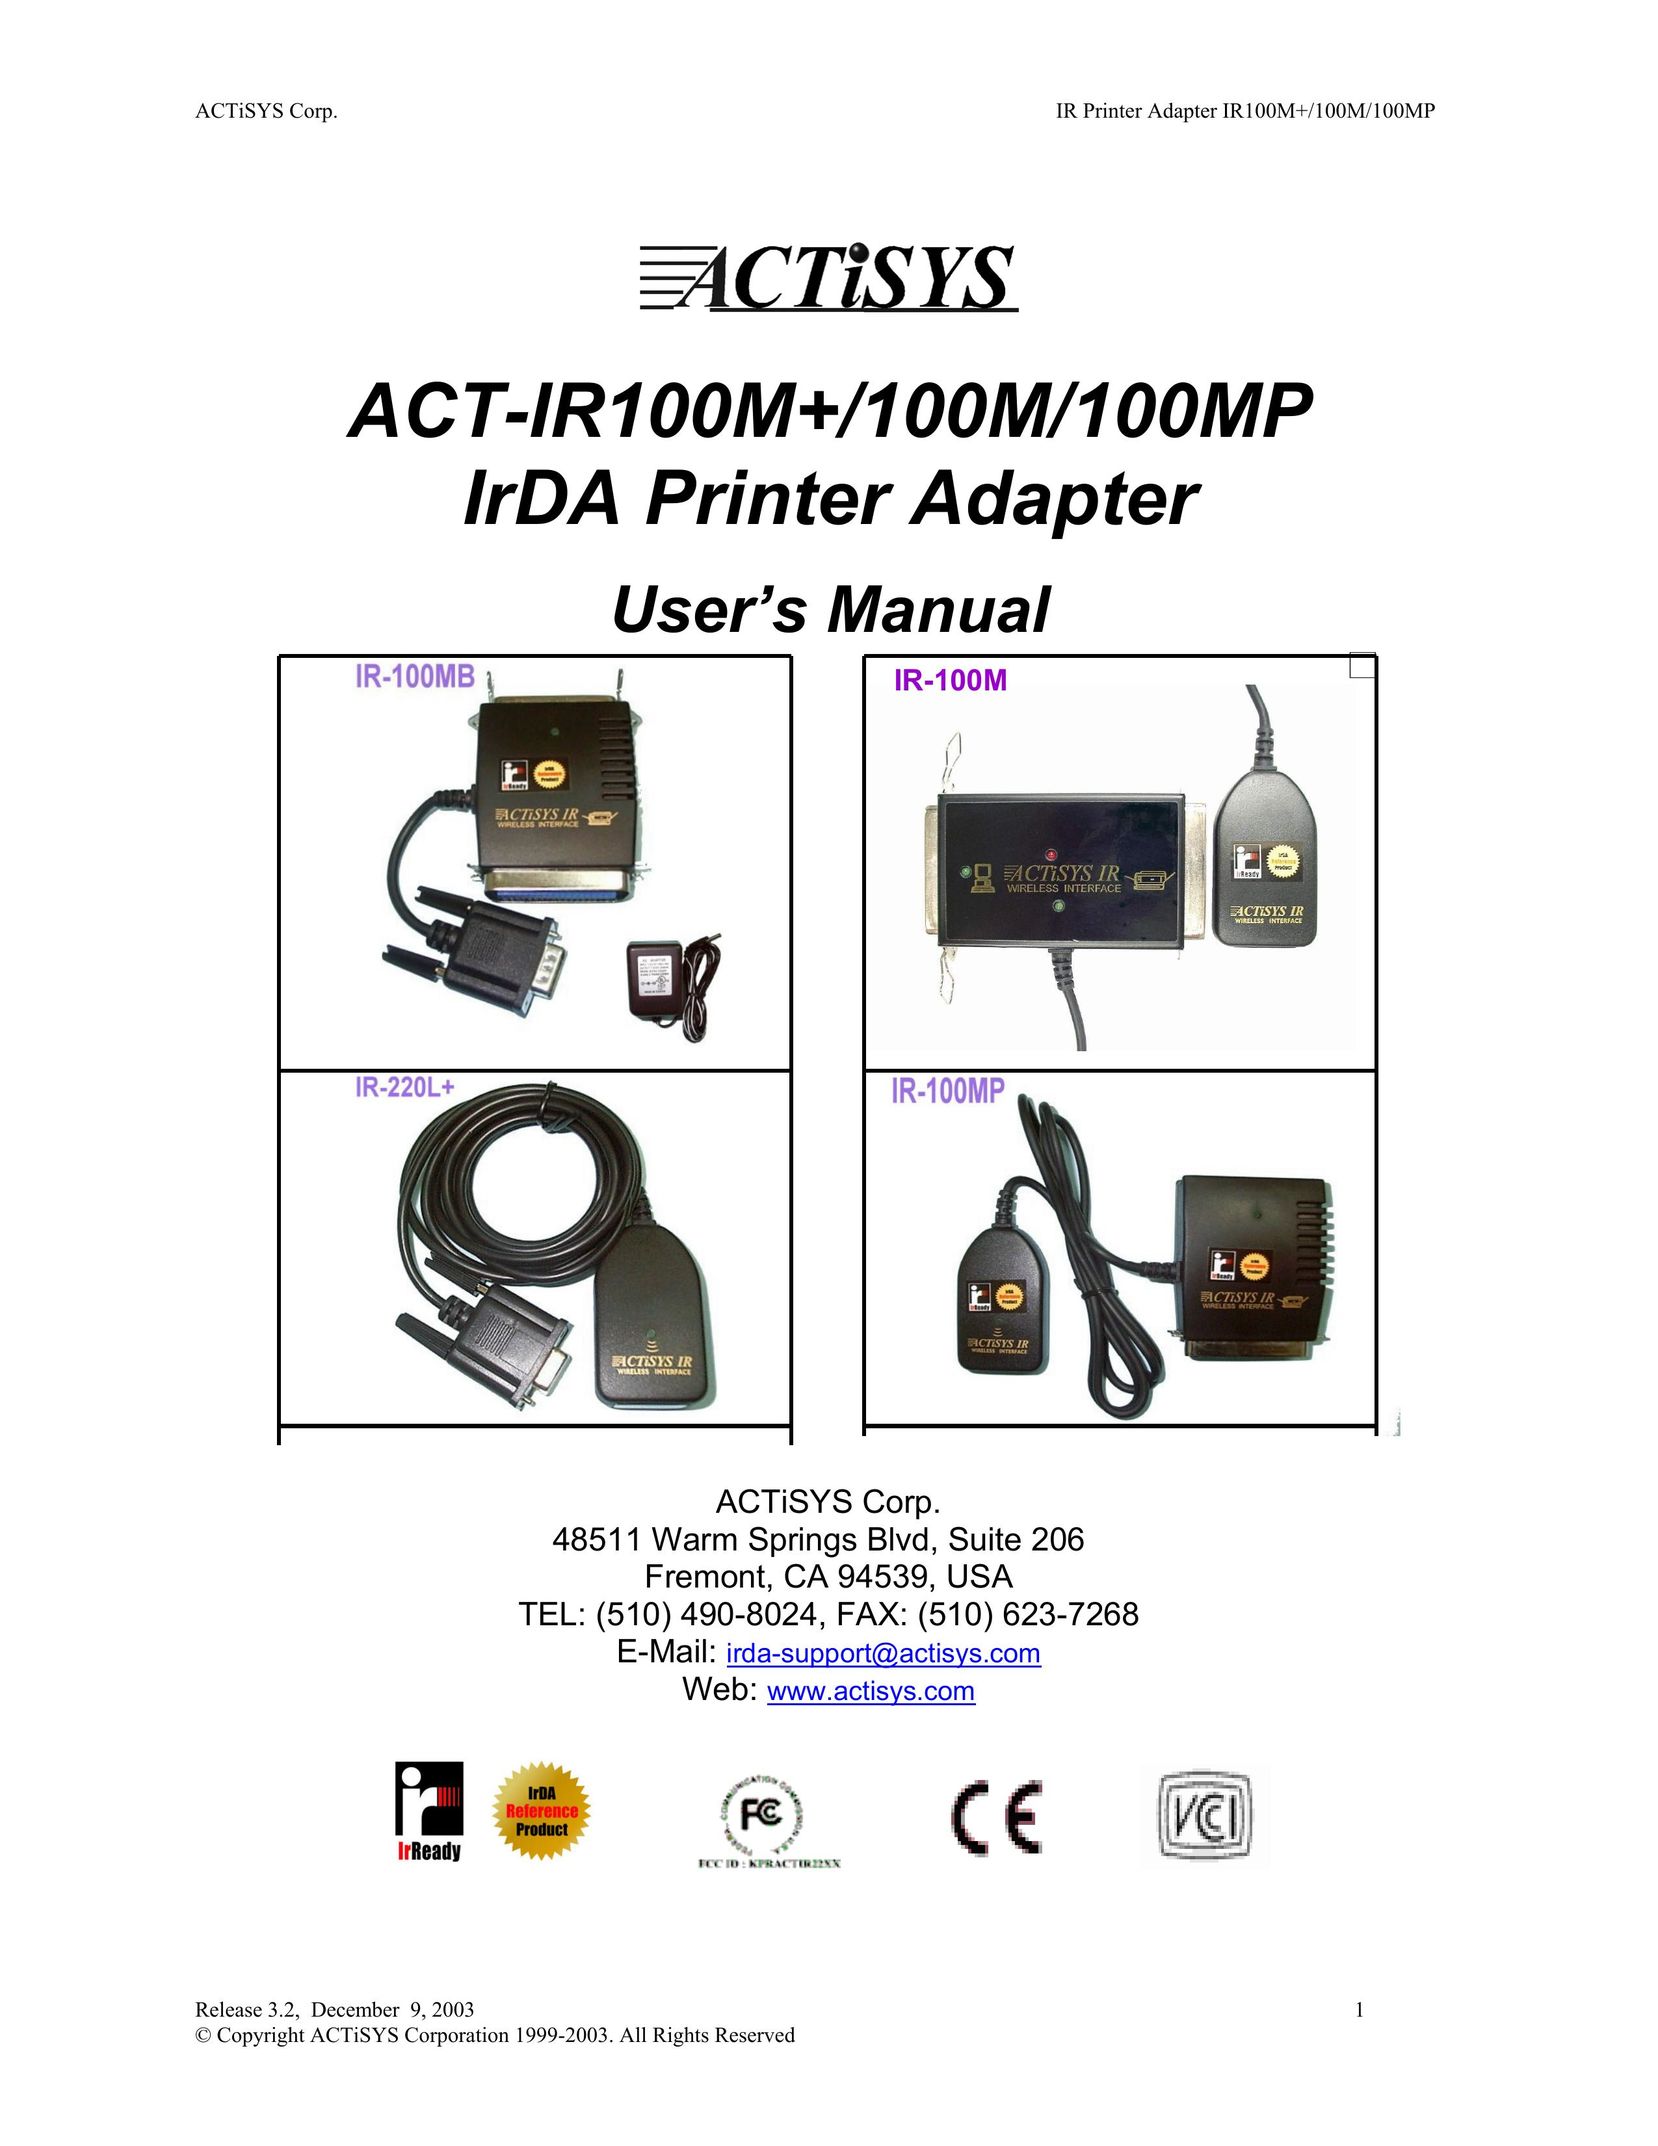 ACTiSYS ACT-100M Network Card User Manual